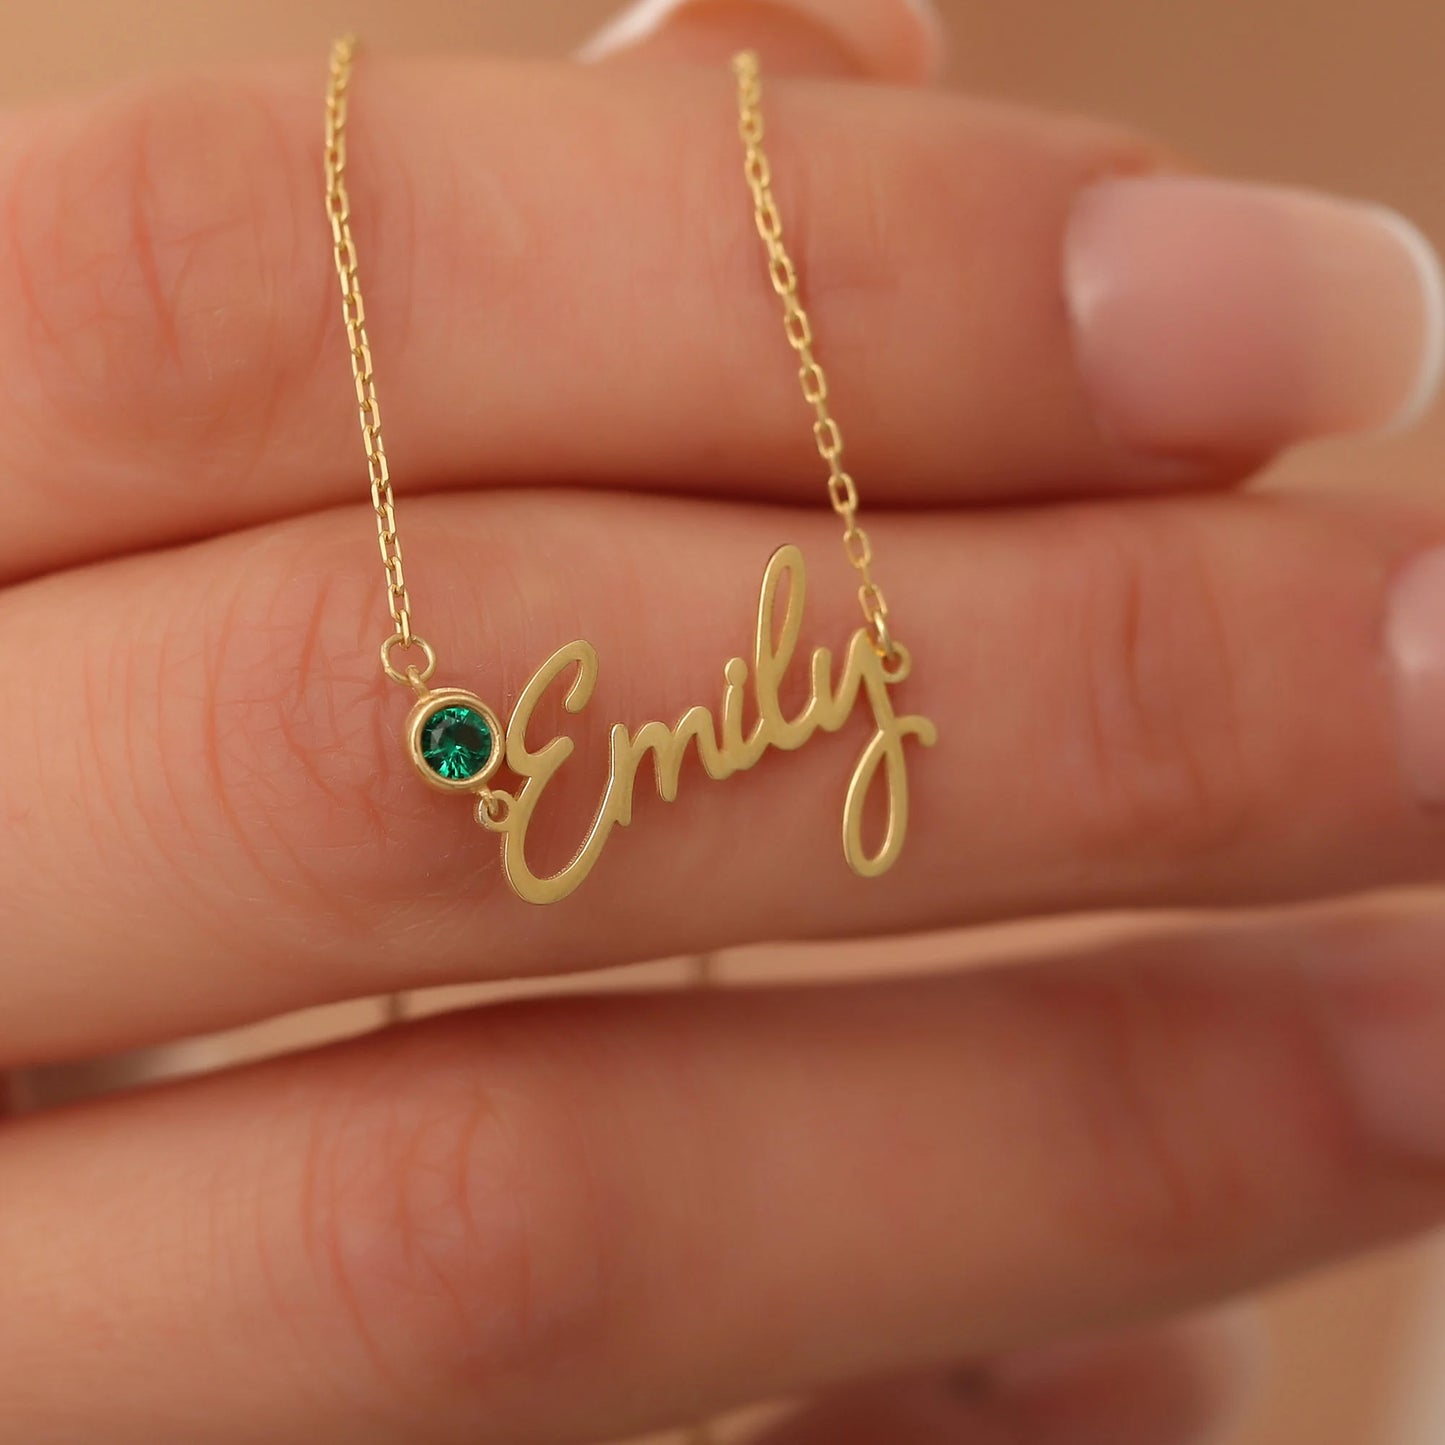 Charming Birthstone Necklace - Sharjah's Top Choice for Gifts